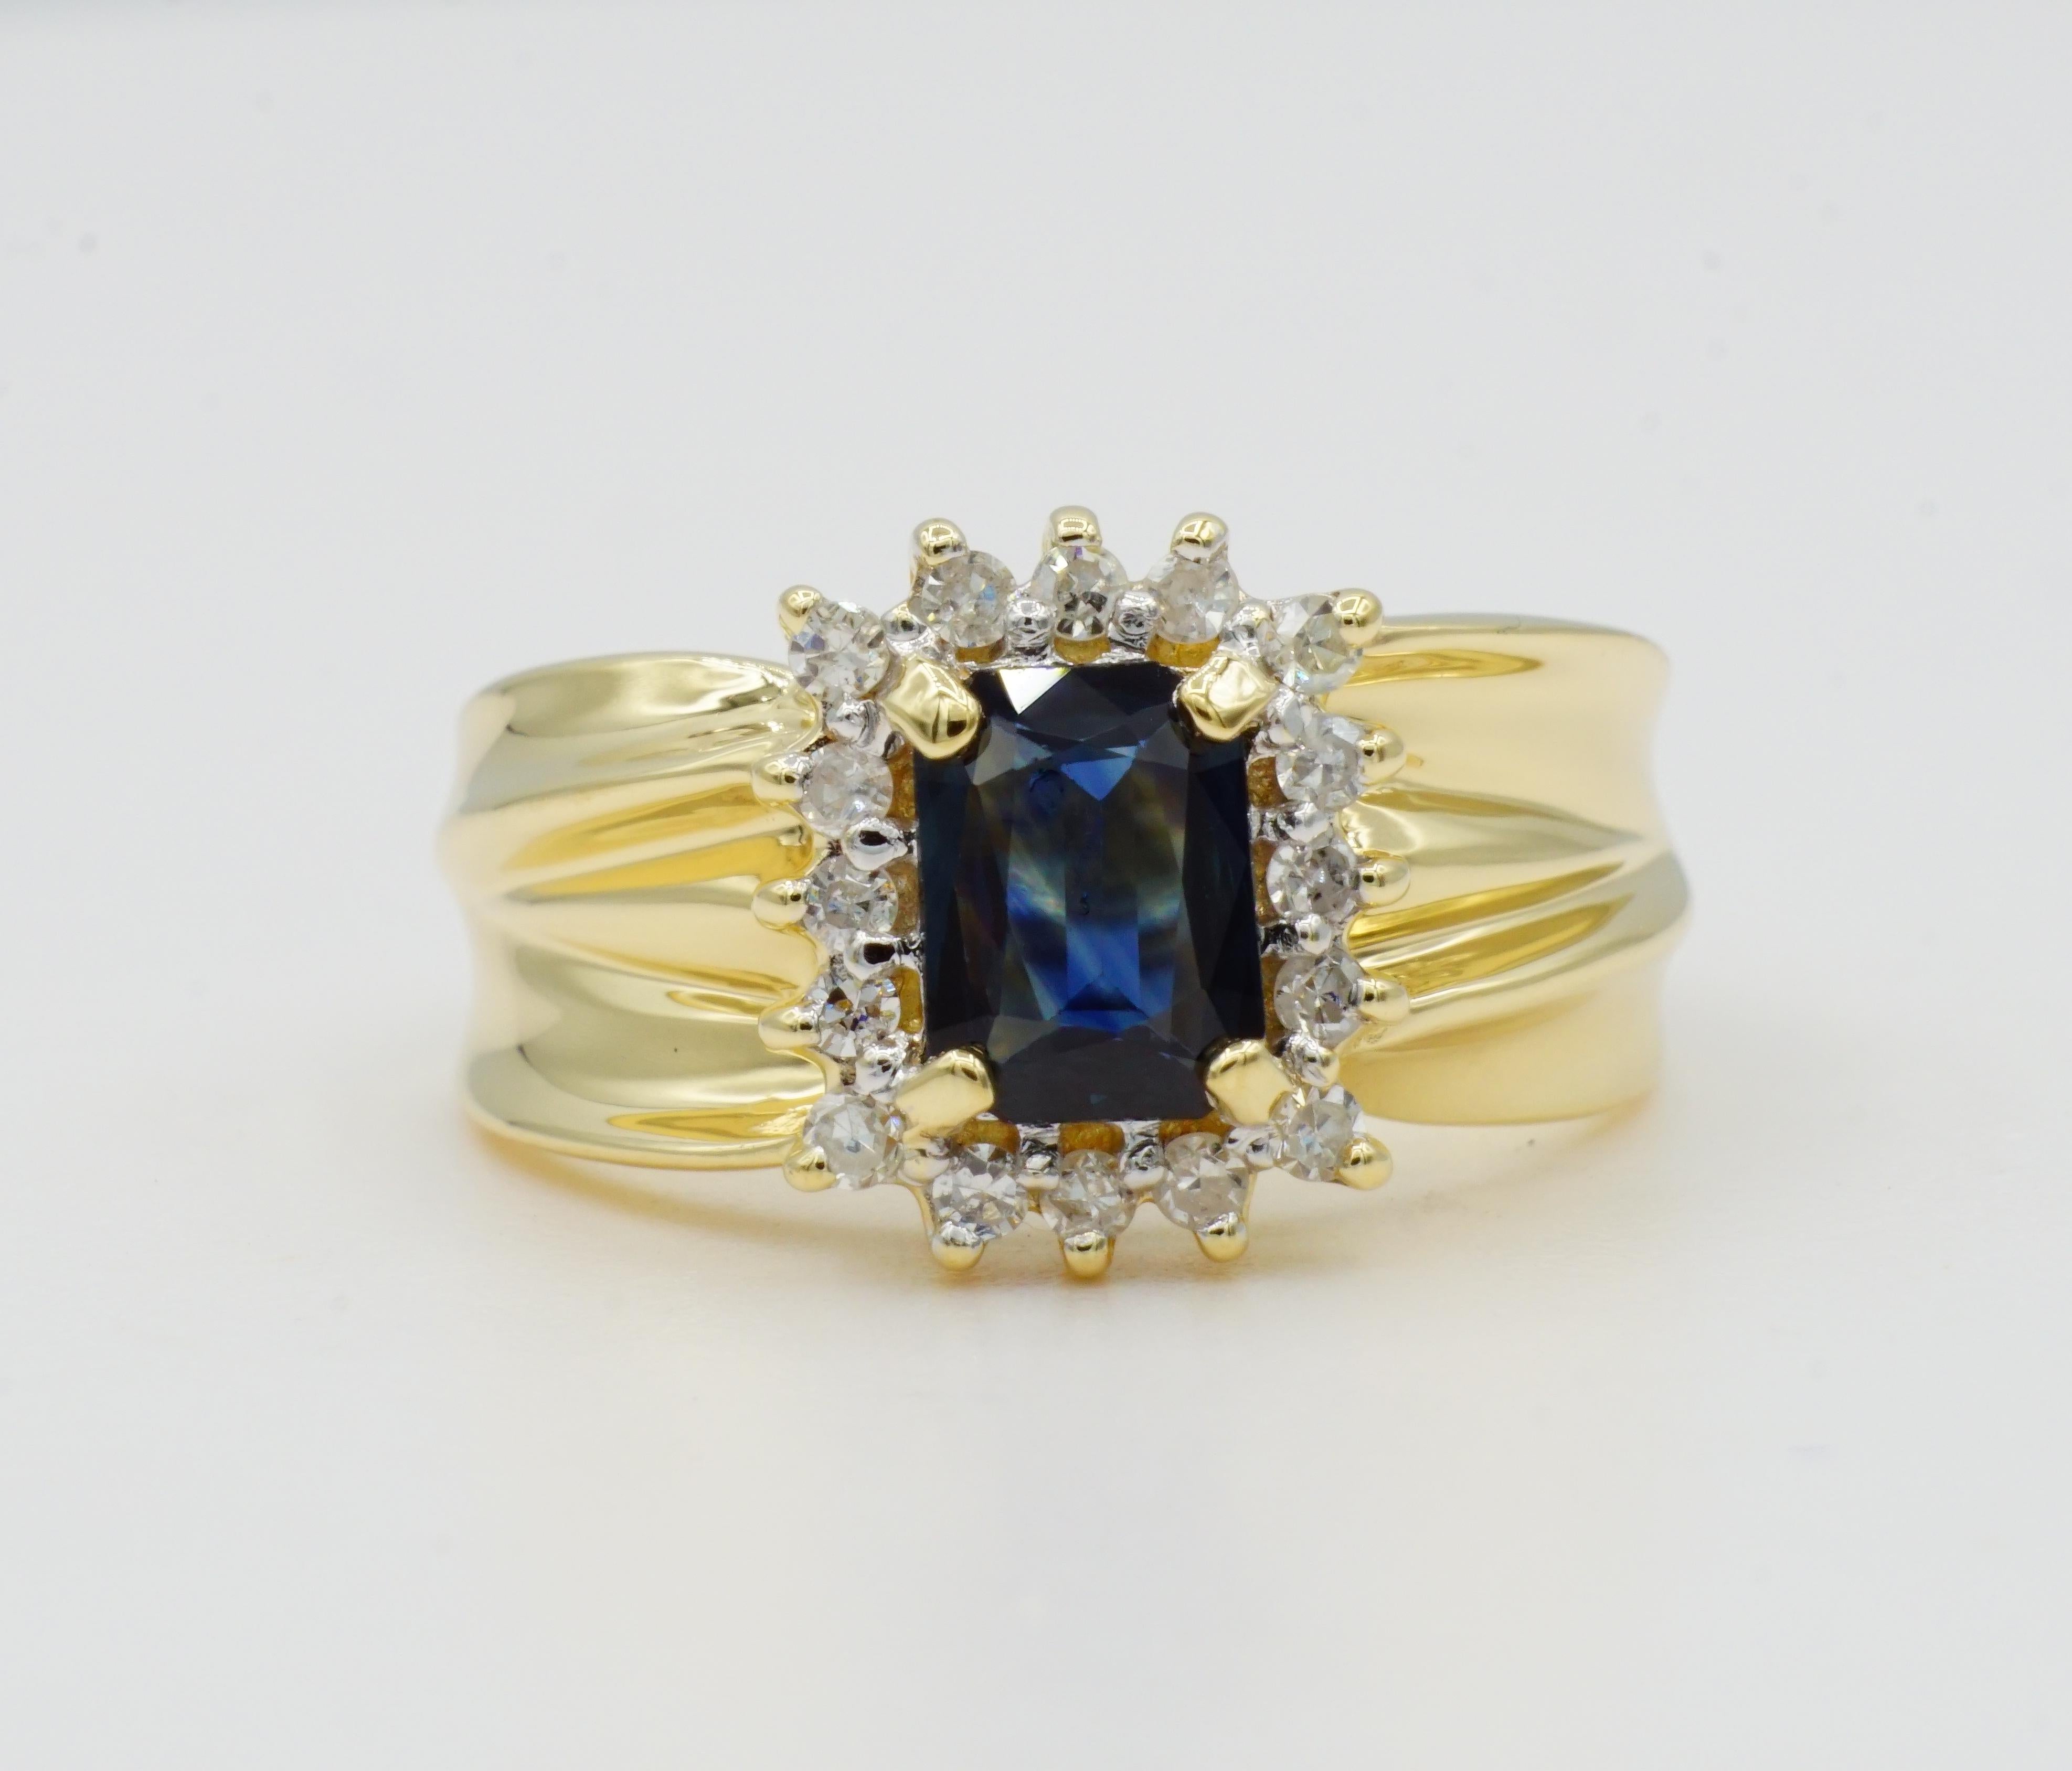 14kt yellow gold ring with a 5 x 7mm emerald cut sapphire (approximately 1.00ct) with rich medium blue color set in a four-prong style setting accented with 16 prong-set round single cut diamonds of .35cttw.  The diamonds are G/H in color and SI in